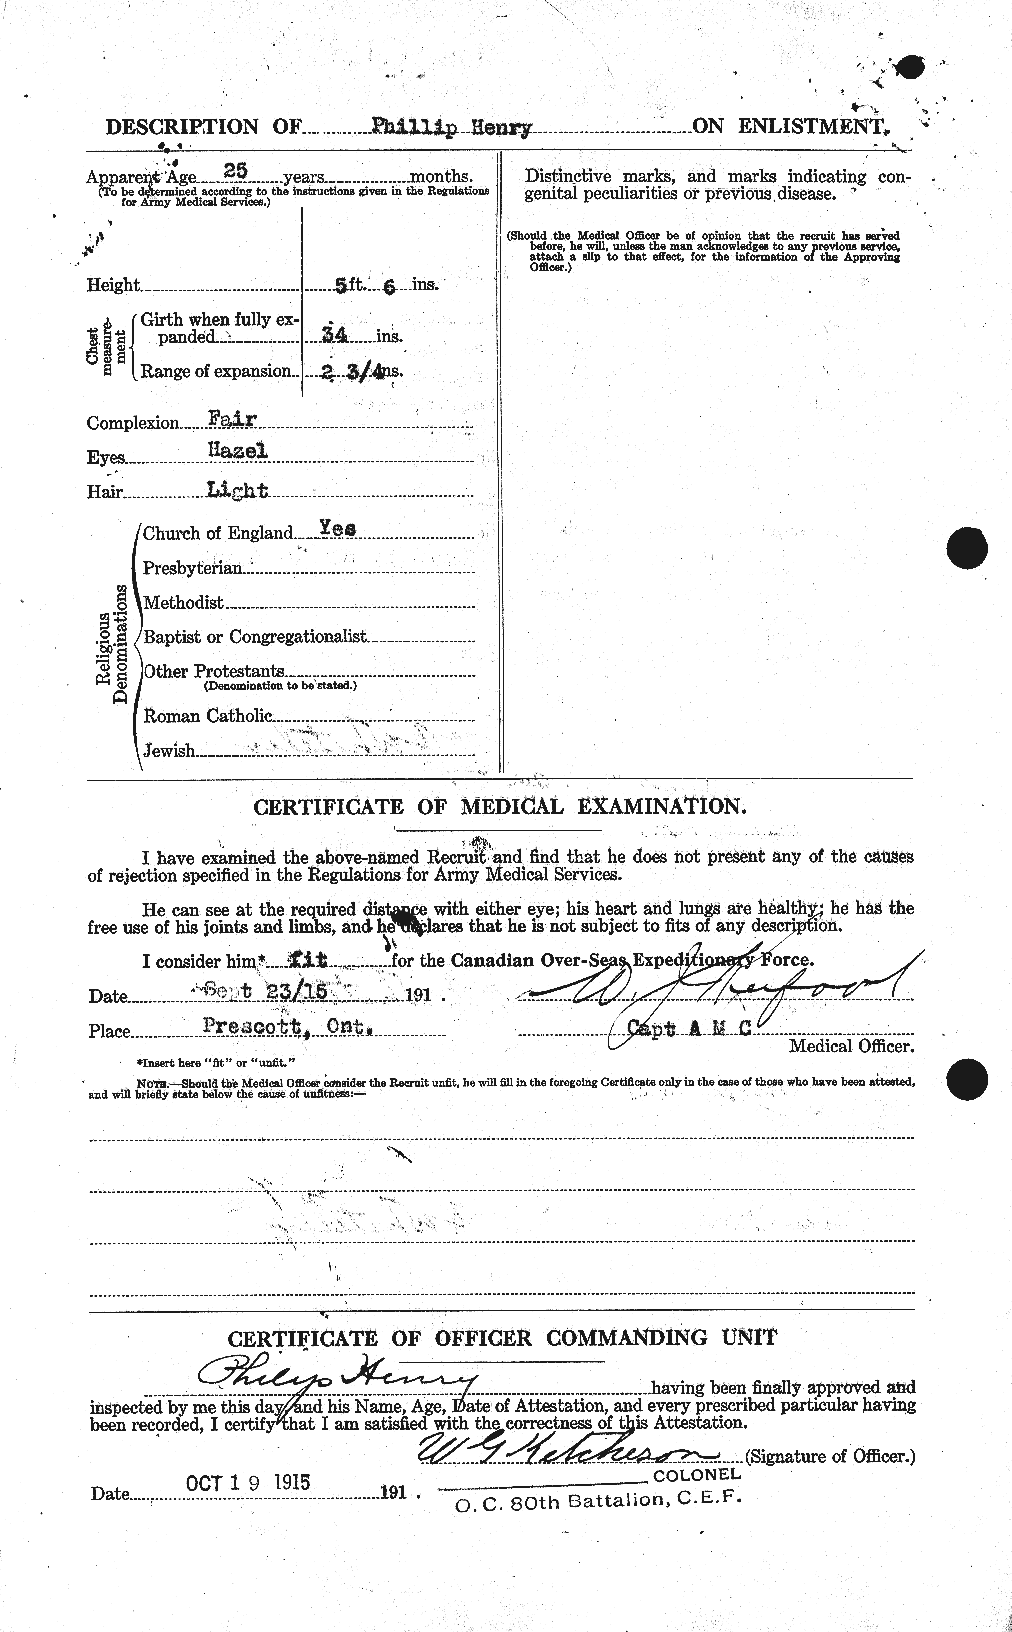 Personnel Records of the First World War - CEF 387690b